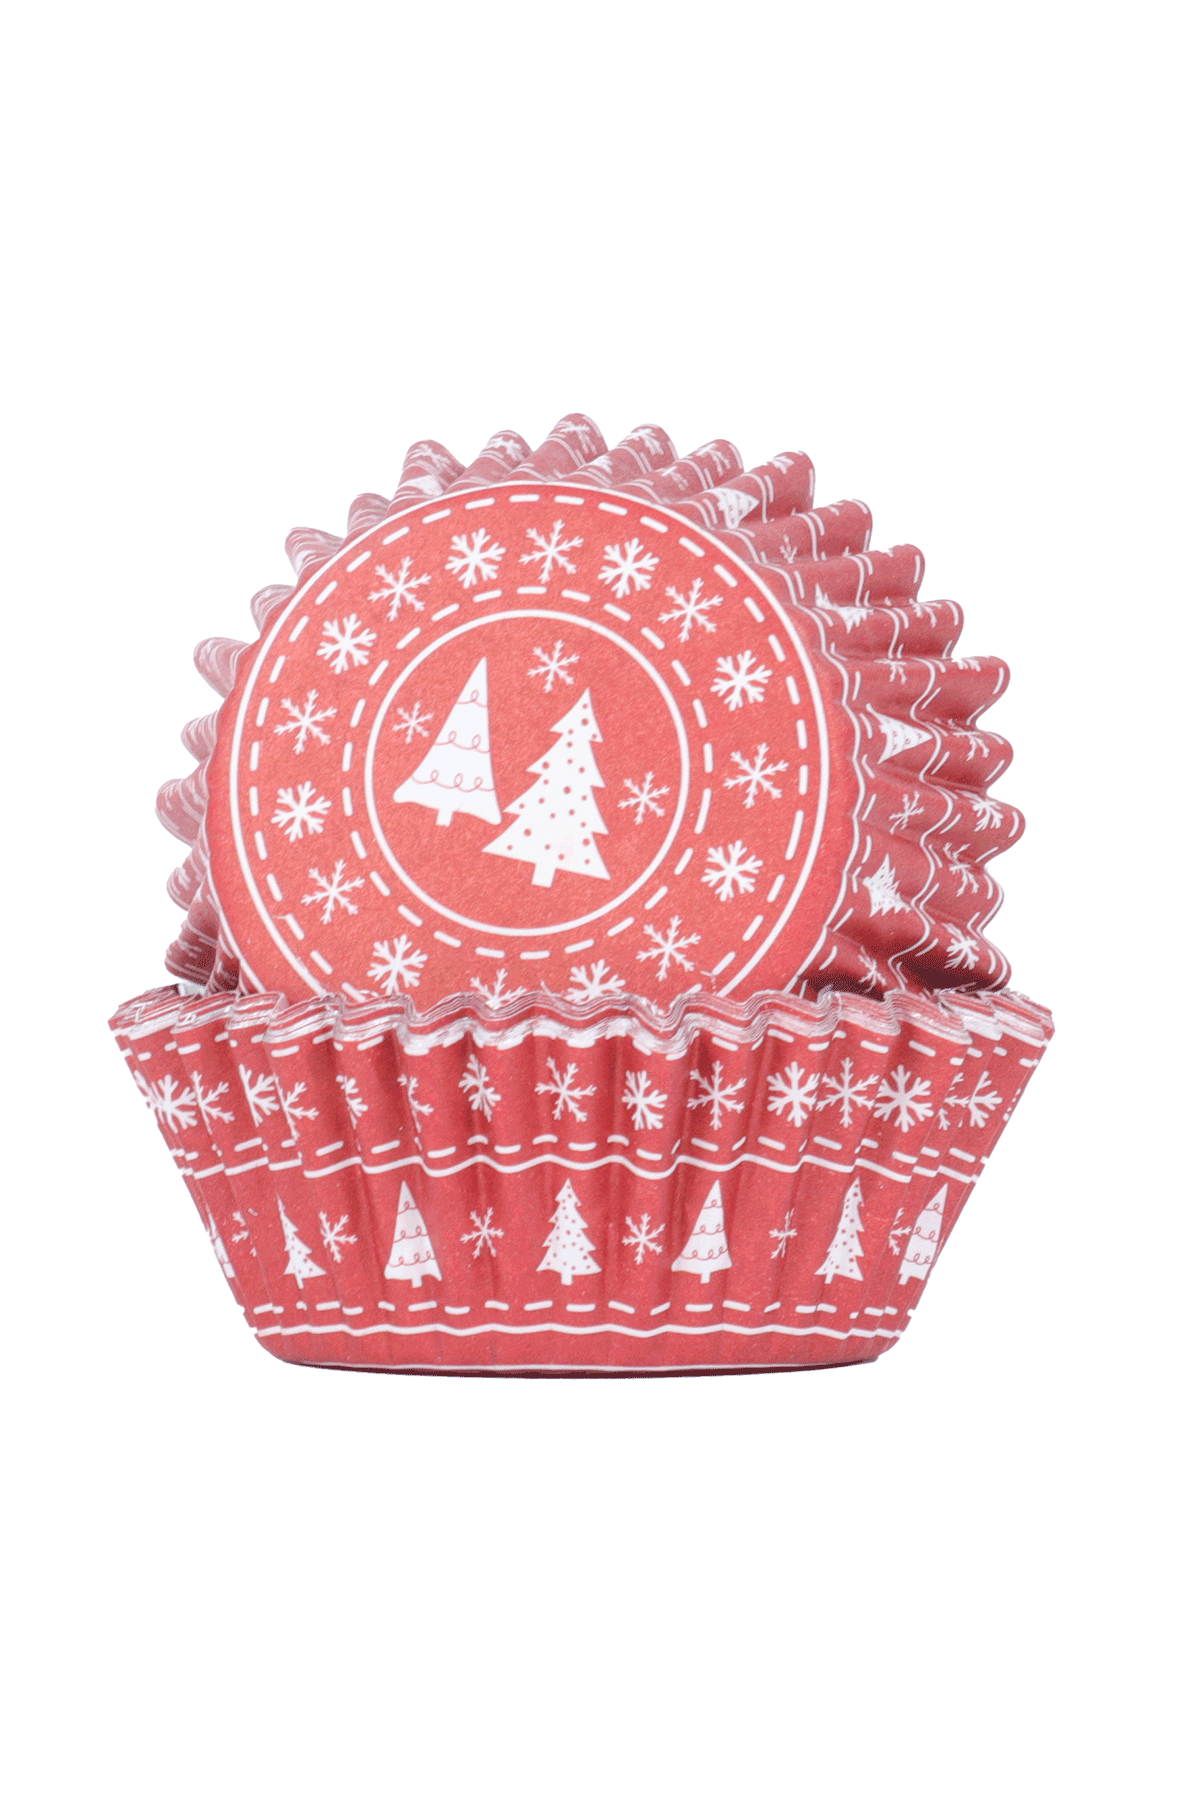 Cupcake Cases - Red Christmas Jumper - 30 Pack Cupcake Cases PME